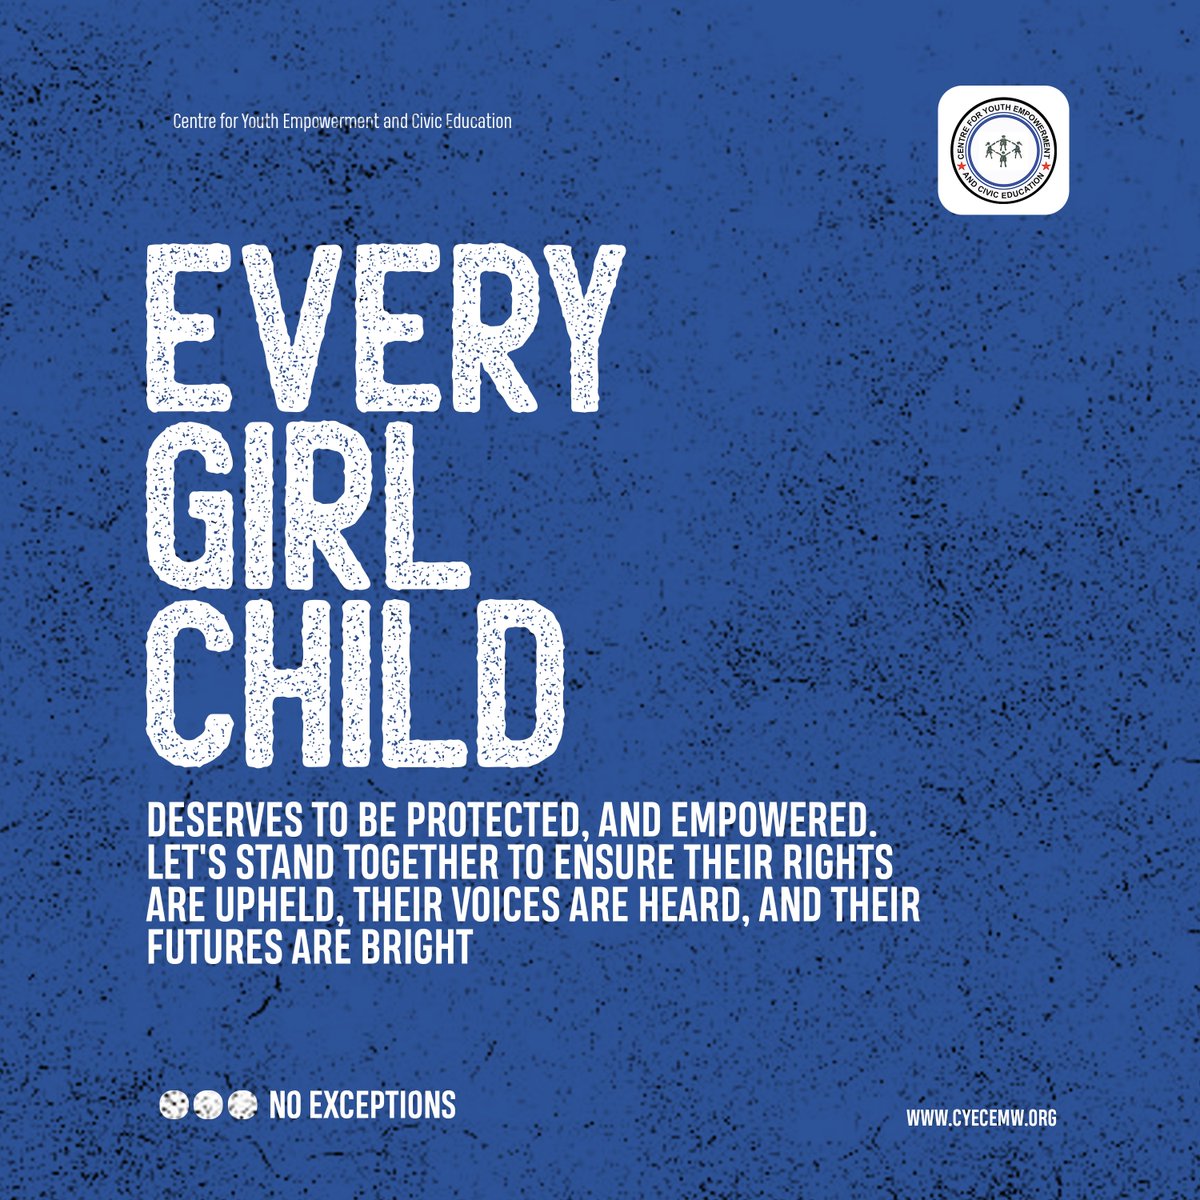 Every Girl child deserves to be protected, and empowered. Let's stand together to ensure their rights are upheld, their voices are heard, and their futures are bright. #girlsrights